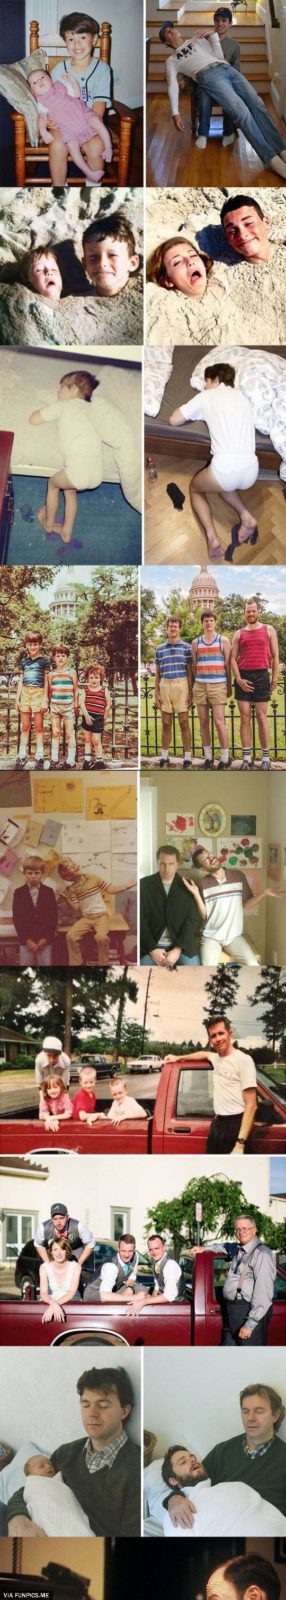 Before And After, Creative Recreations Of Childhood Photos